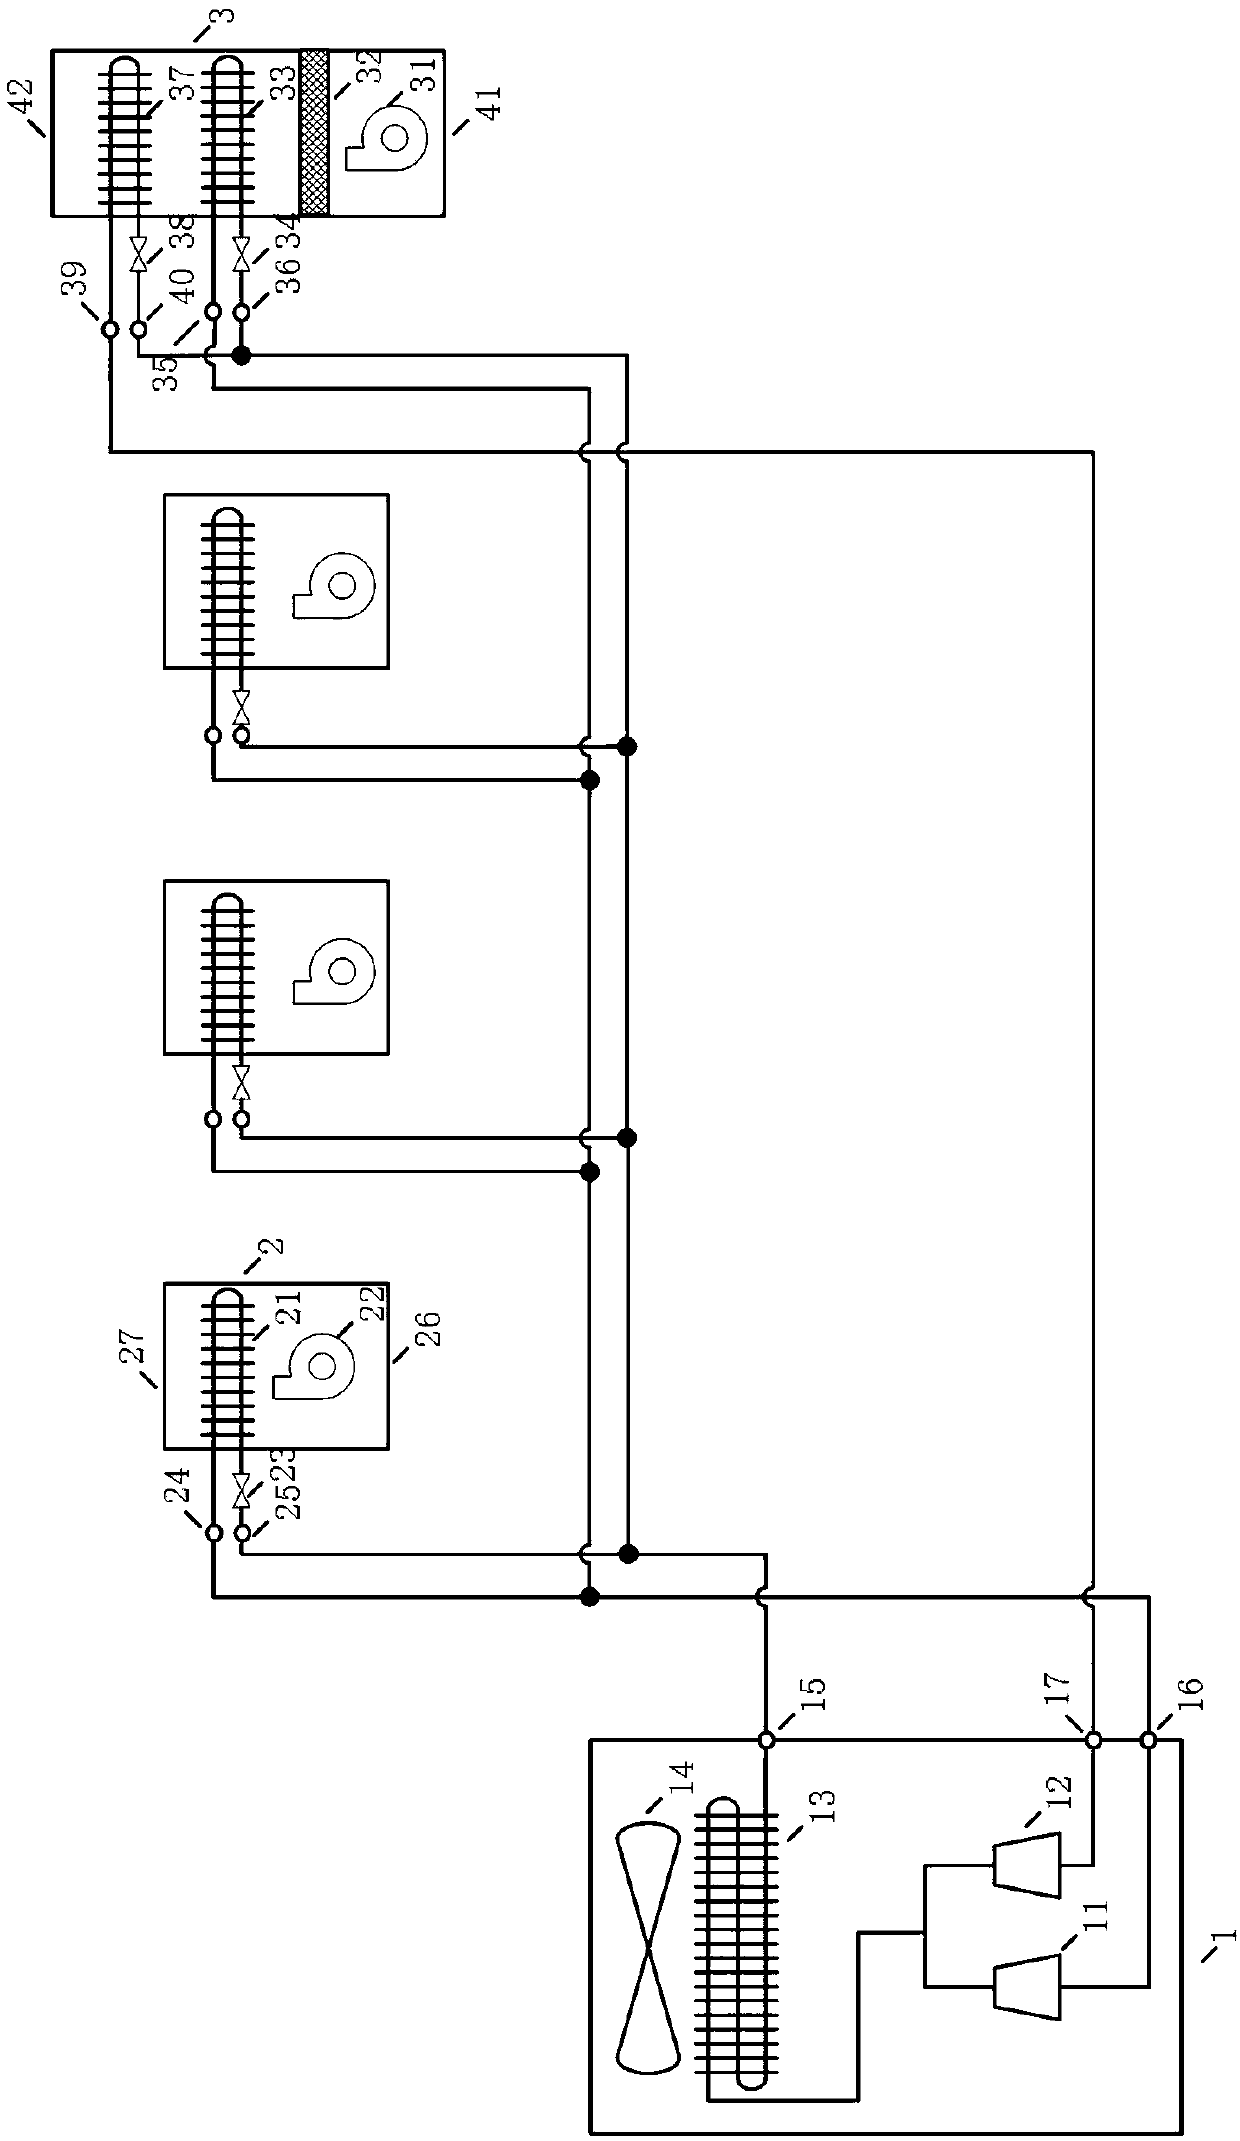 Integrated multi-connected high-temperature air conditioning unit with fresh air handling function